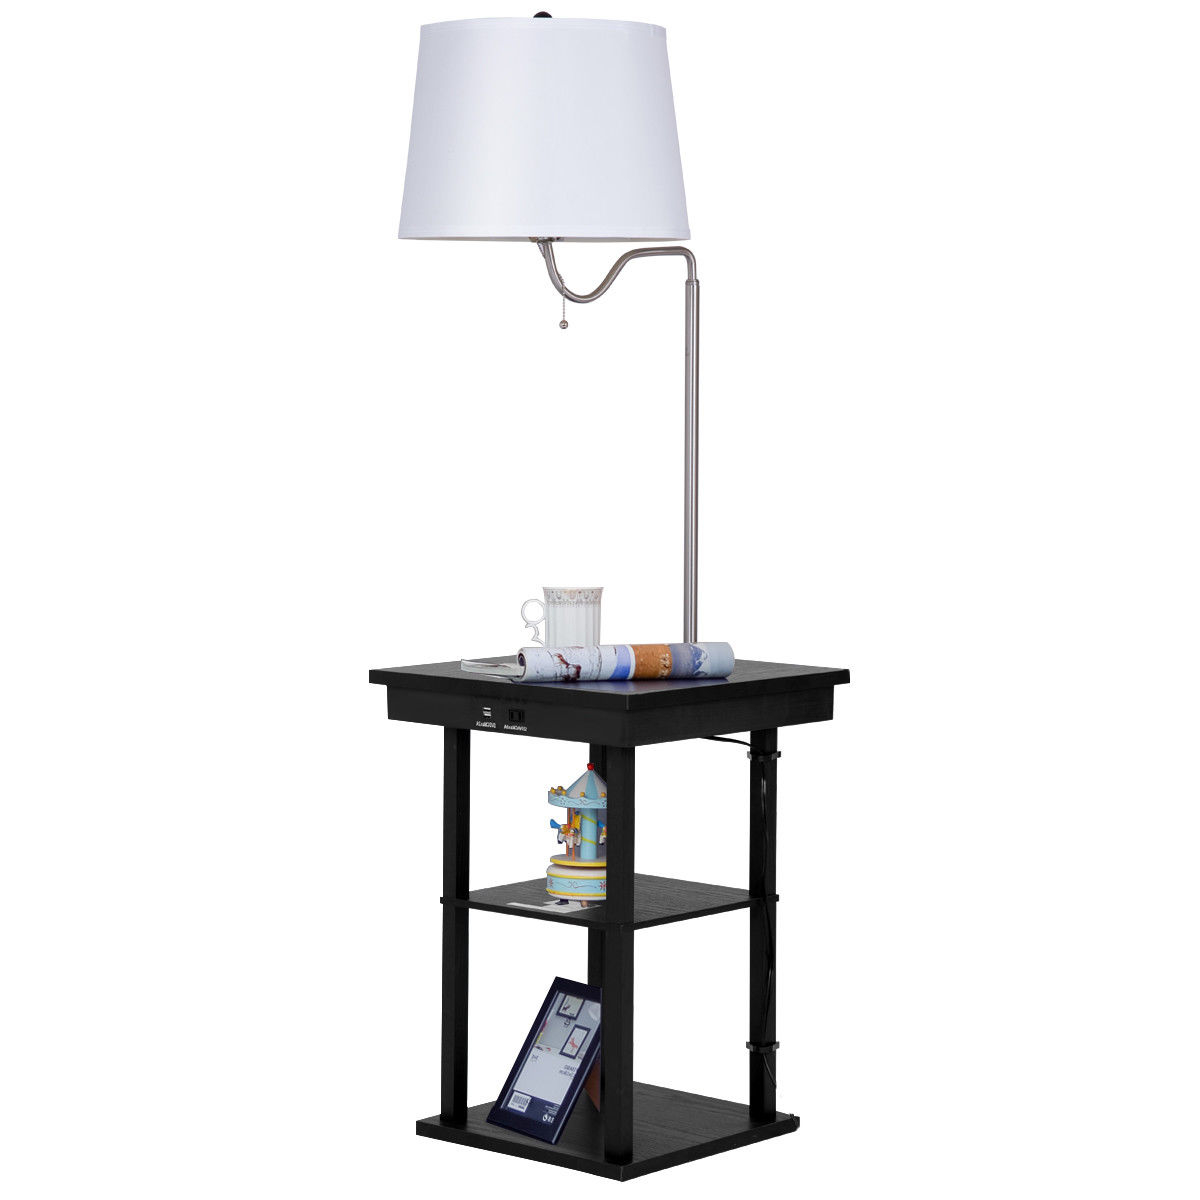 Gymax Floor Lamp Swing Arm Lamp Built In End Table W Shade 2 Usb Ports Living Room Walmart with regard to sizing 1200 X 1200